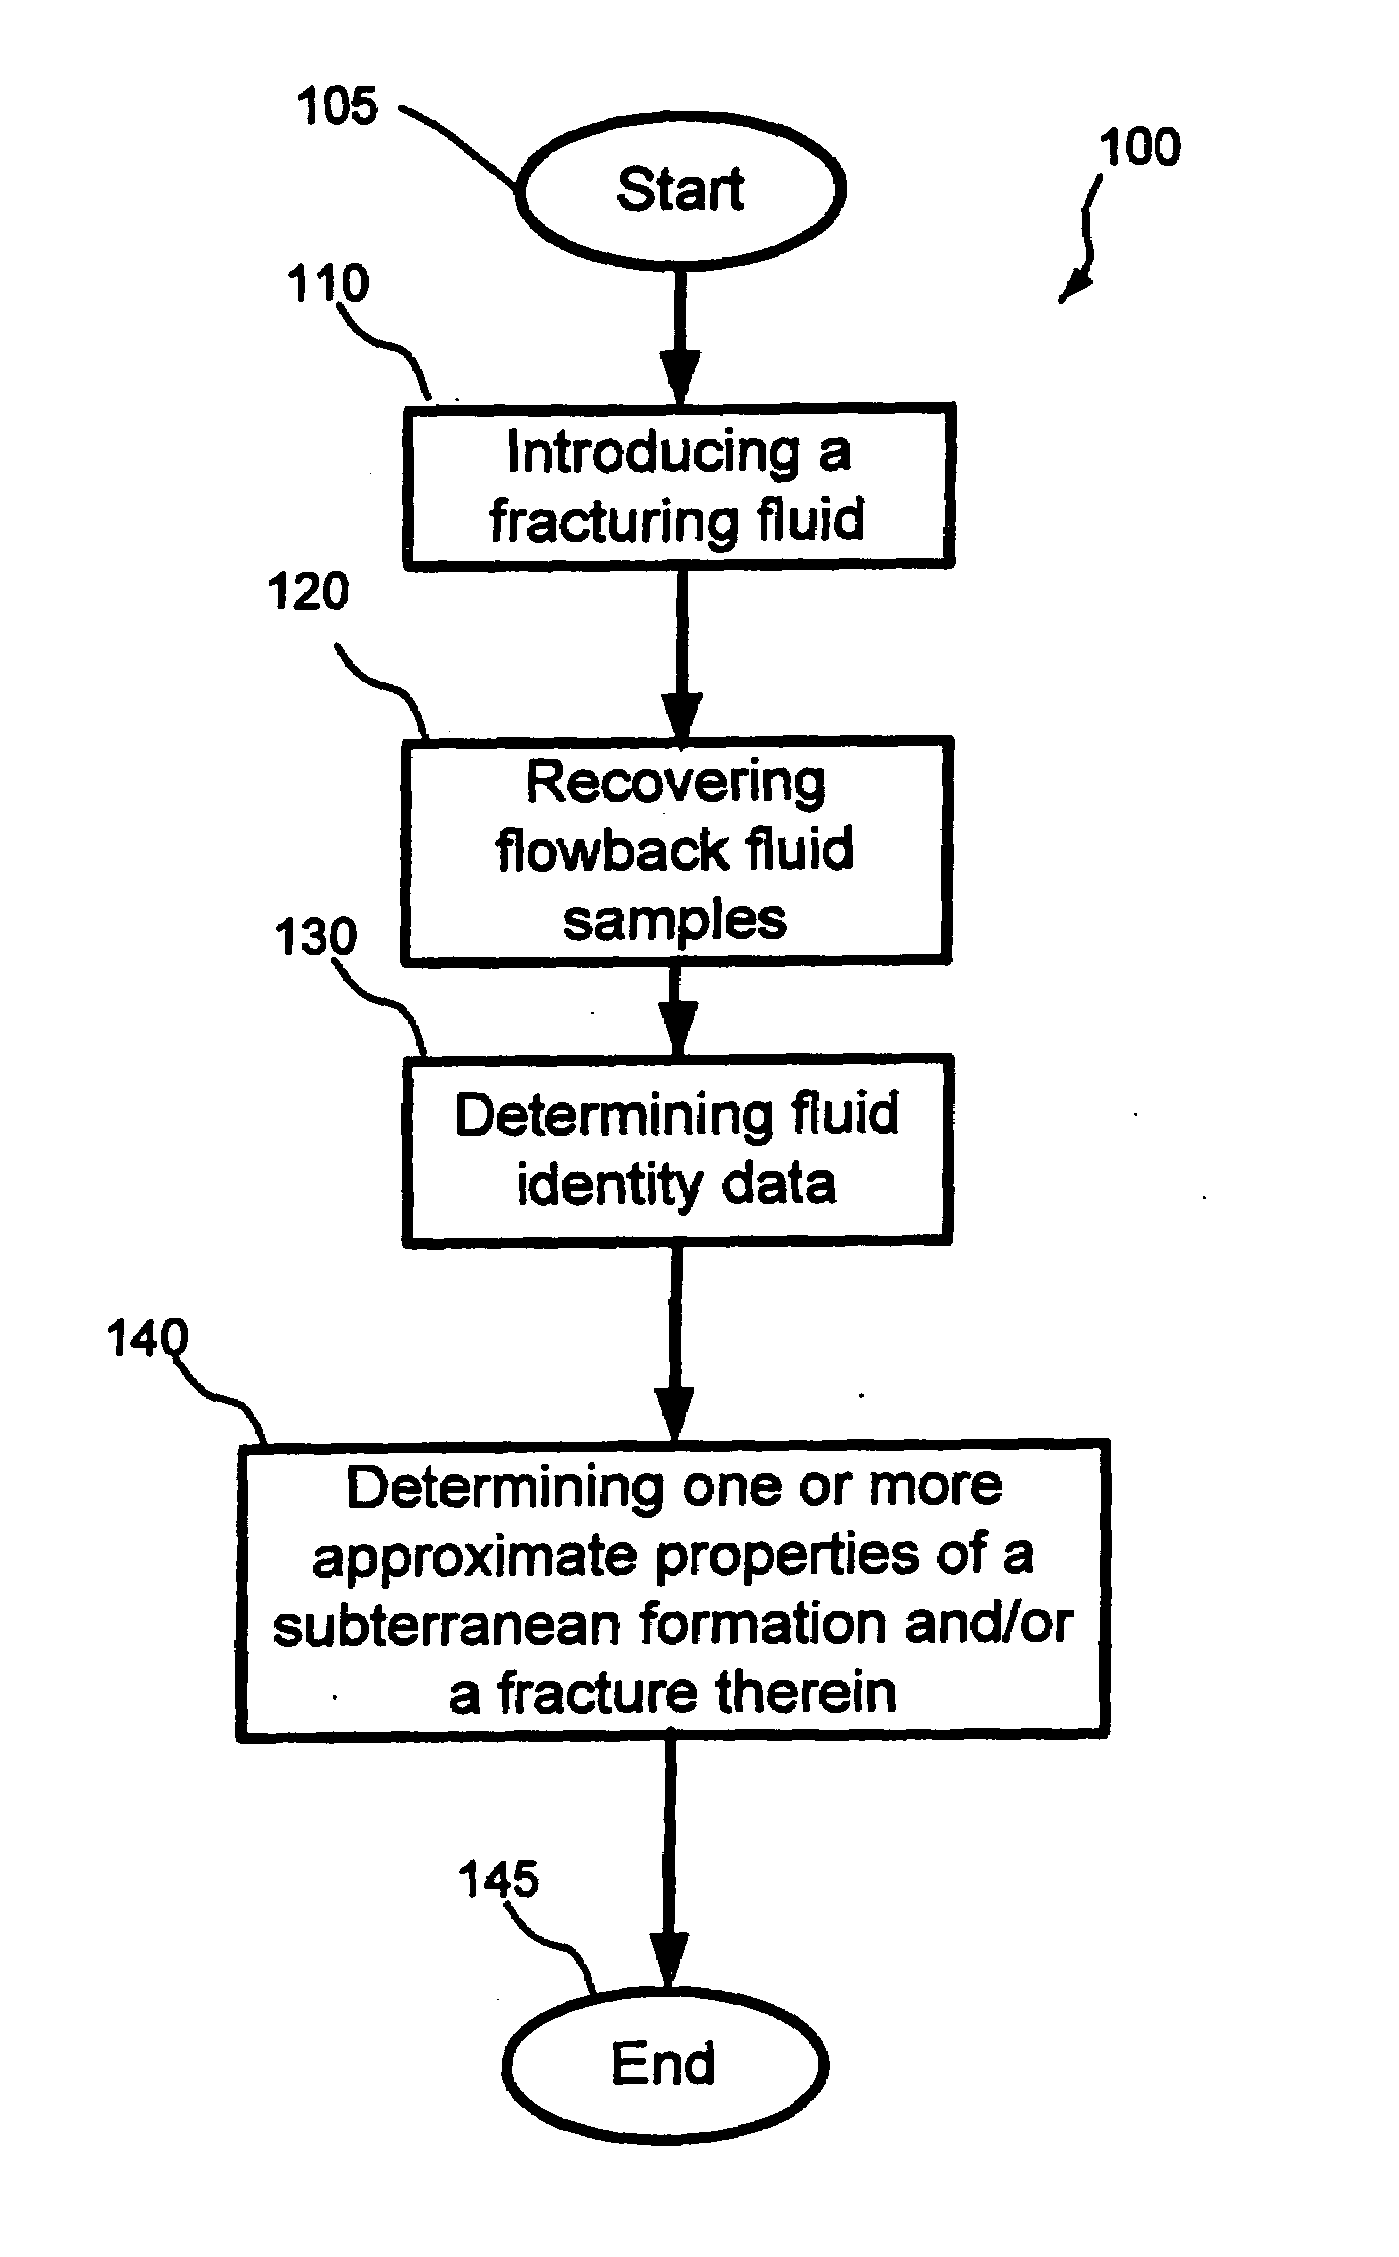 Methods for estimating properties of a subterranean formation and/or a fracture therein